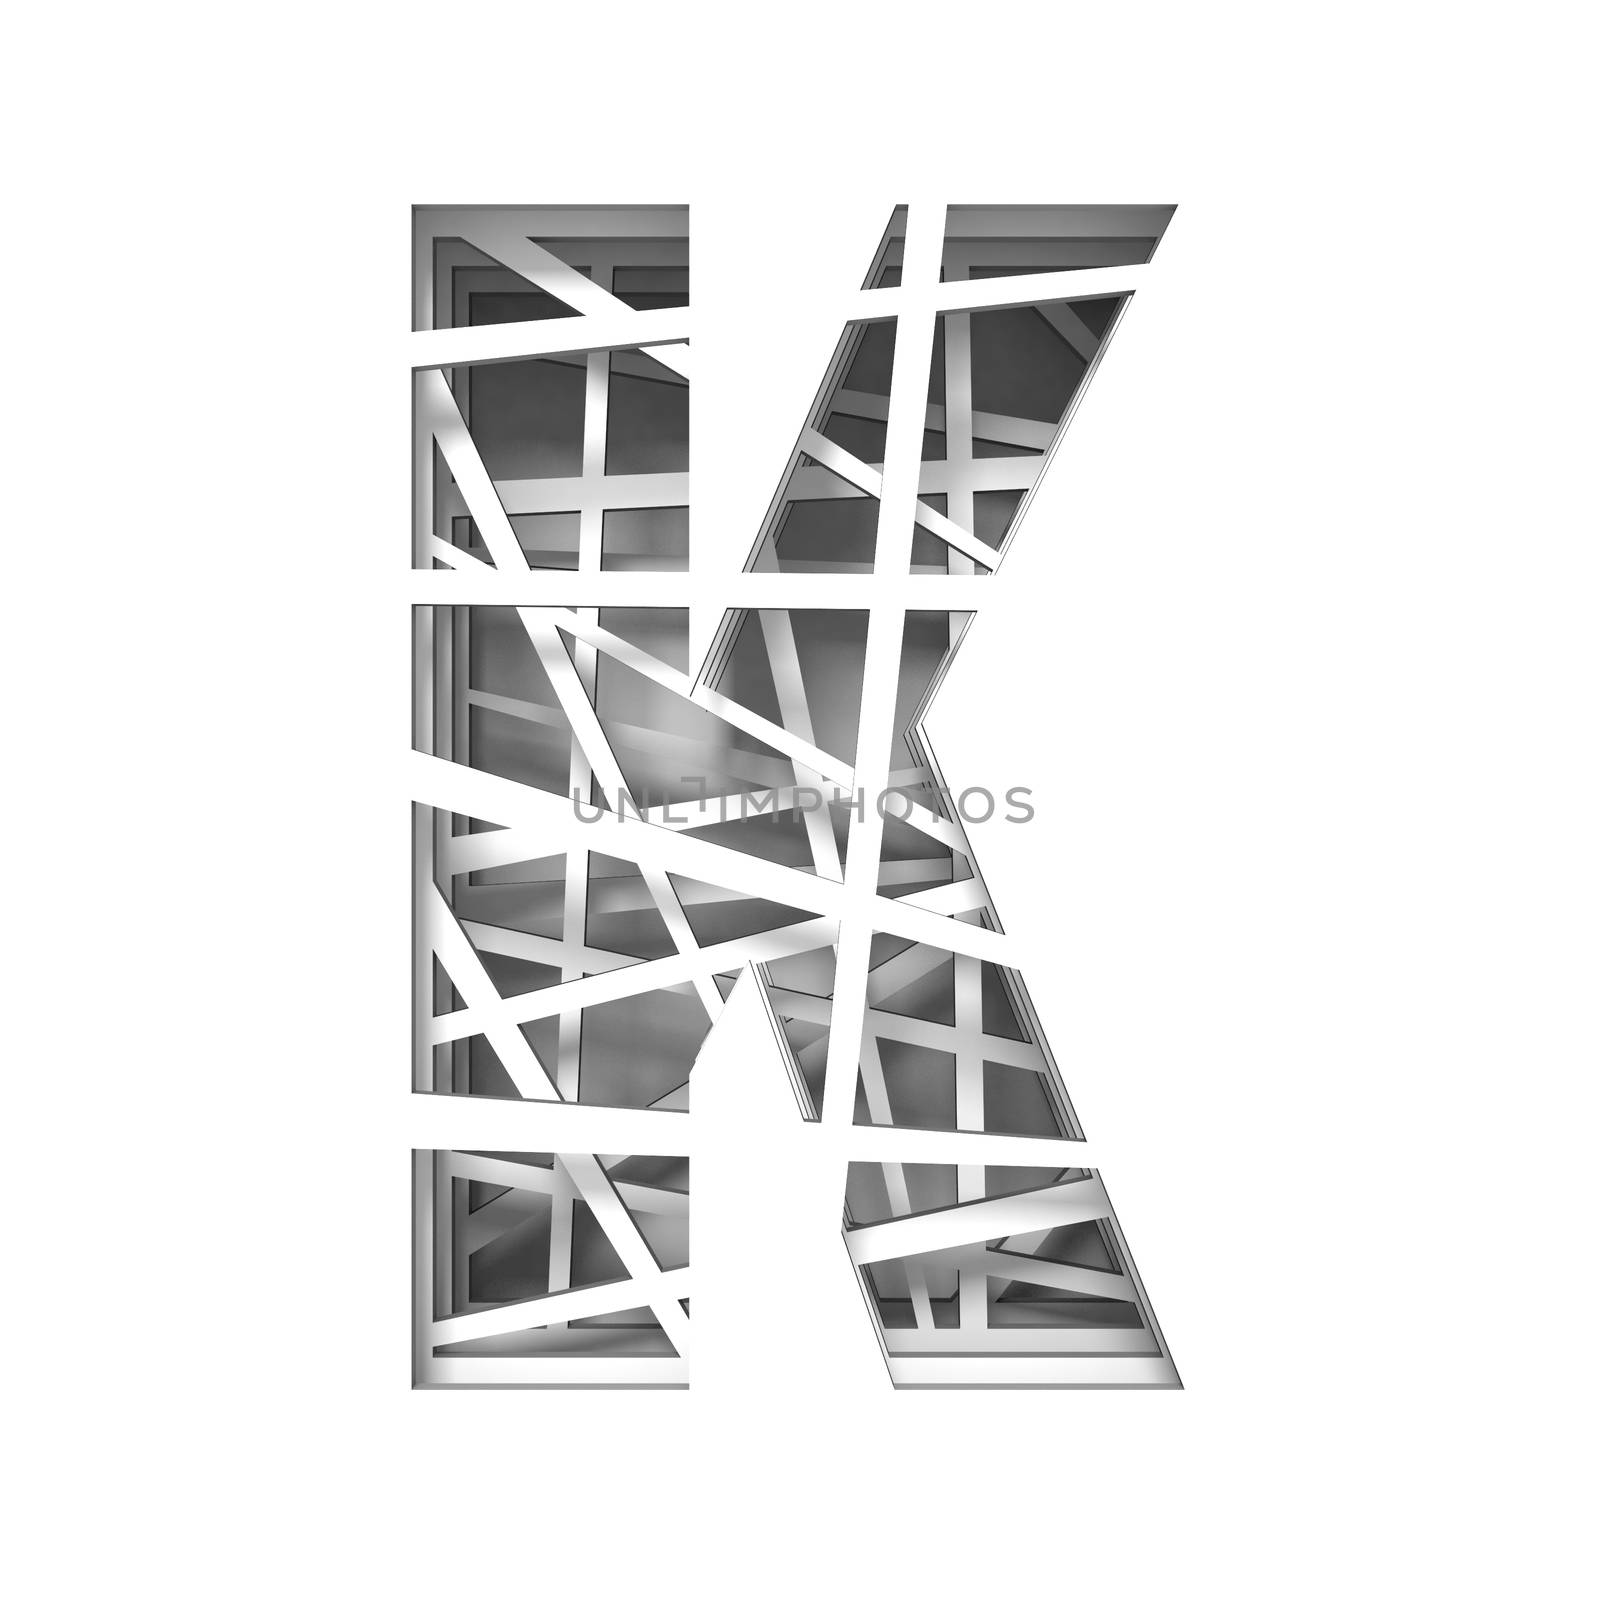 Paper cut out font letter K 3D render illustration isolated on white background